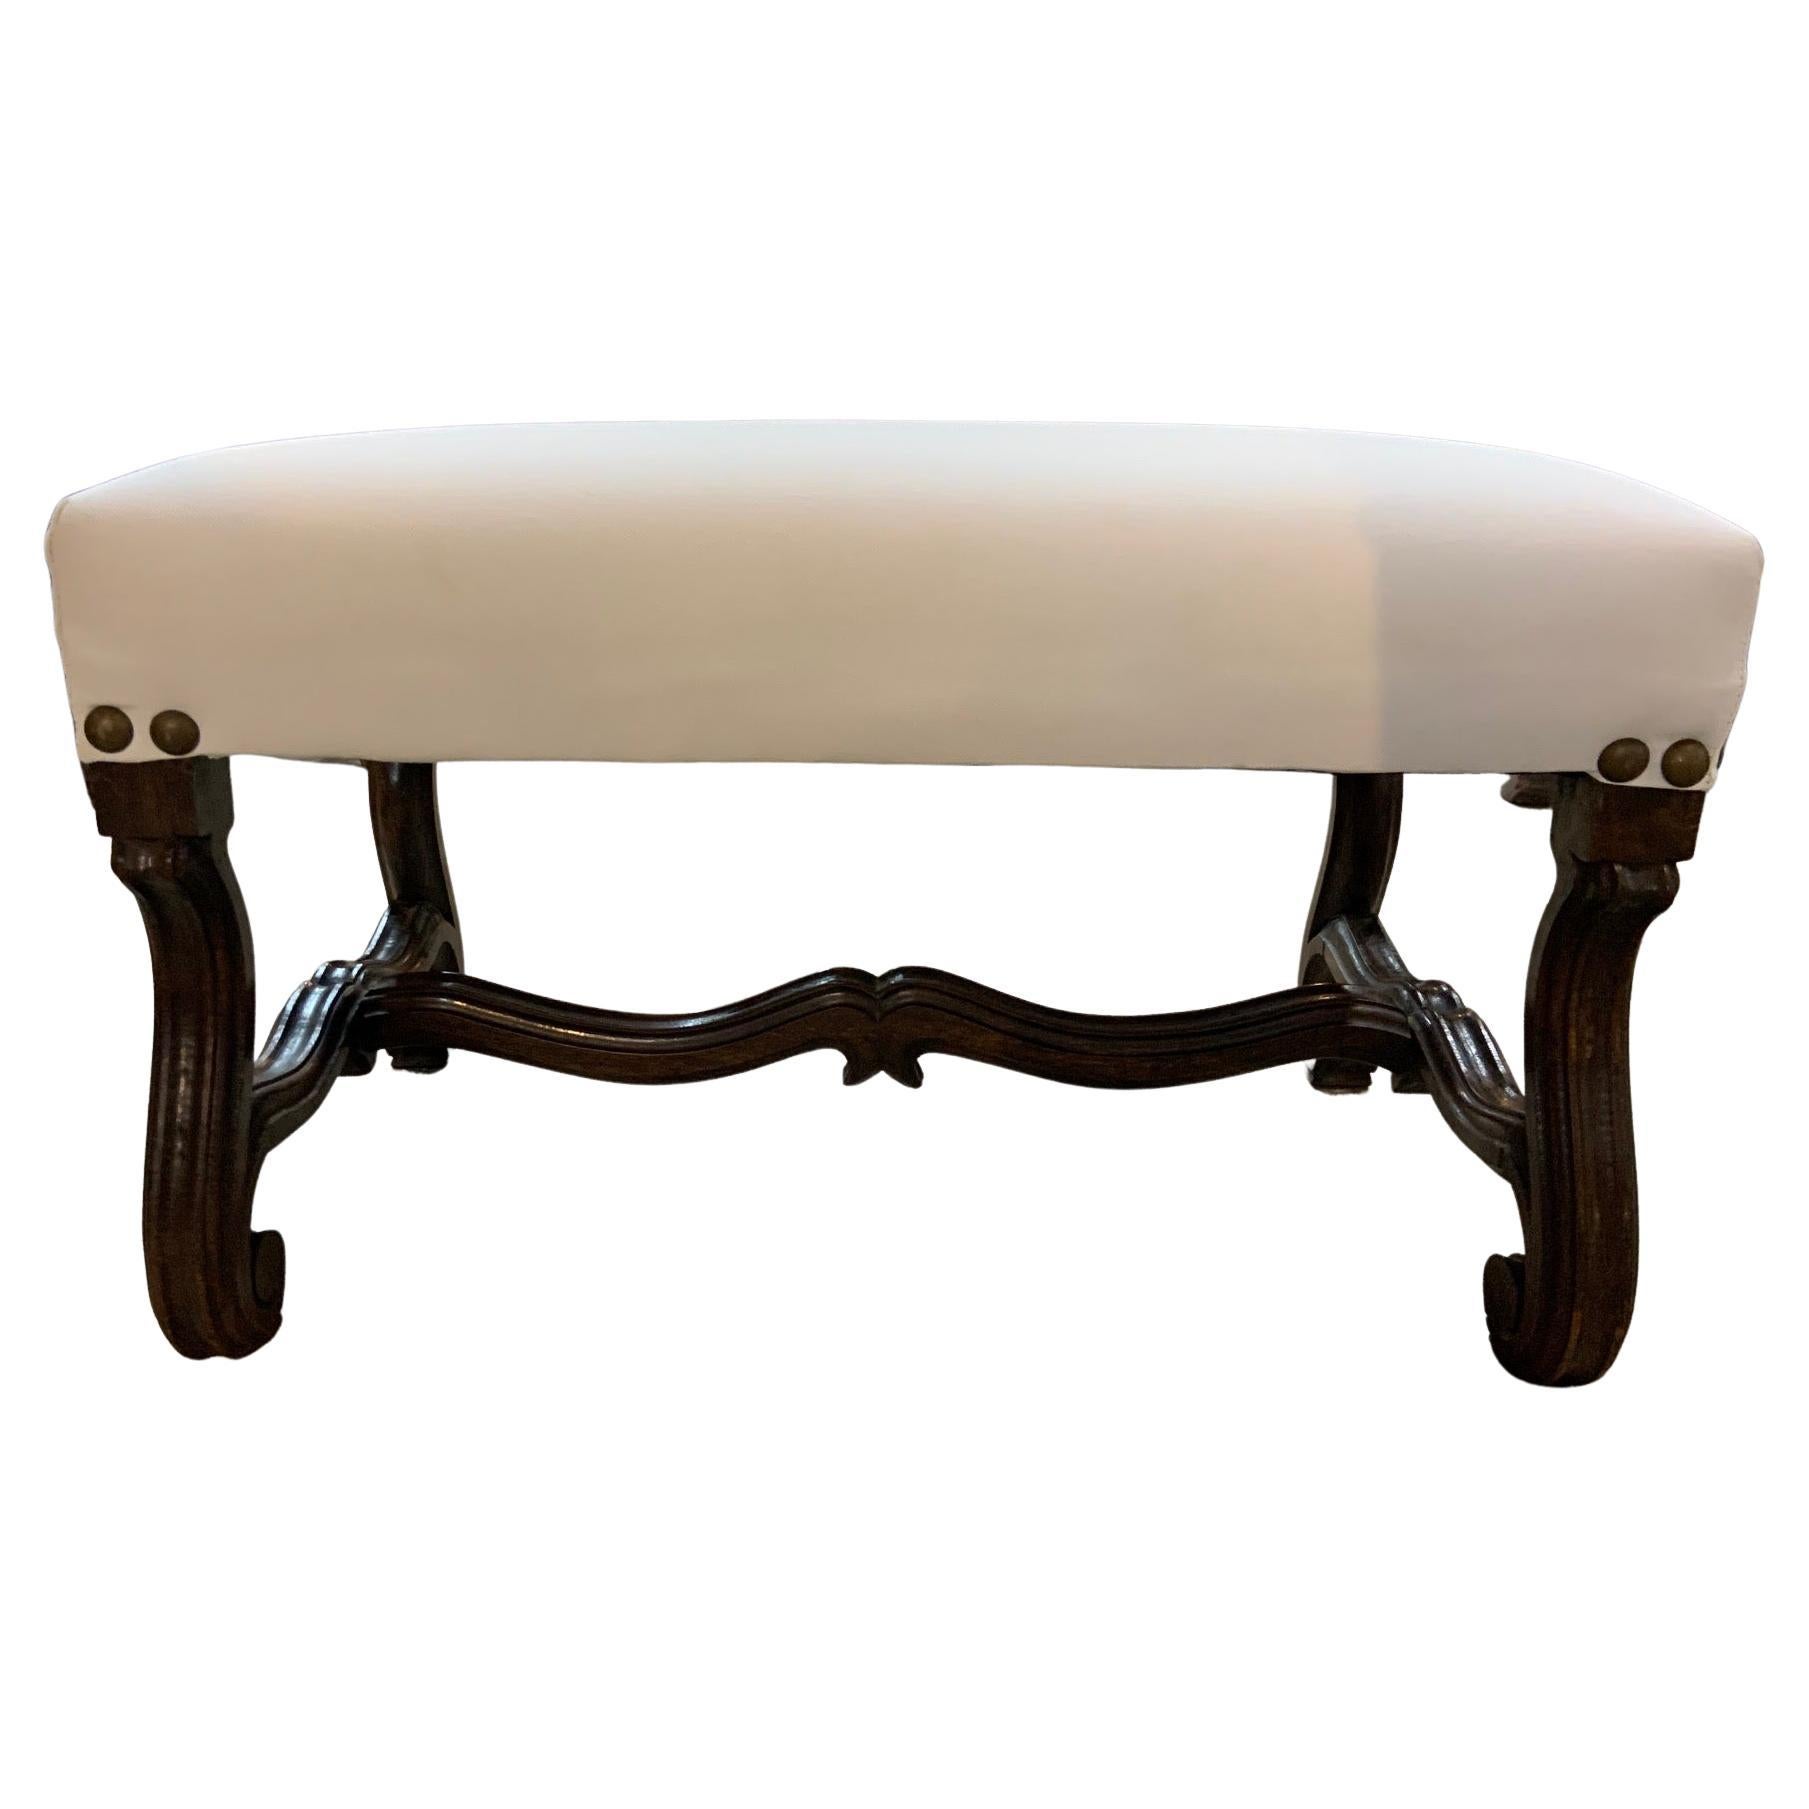 19th Century French Louis 13th Style Stool